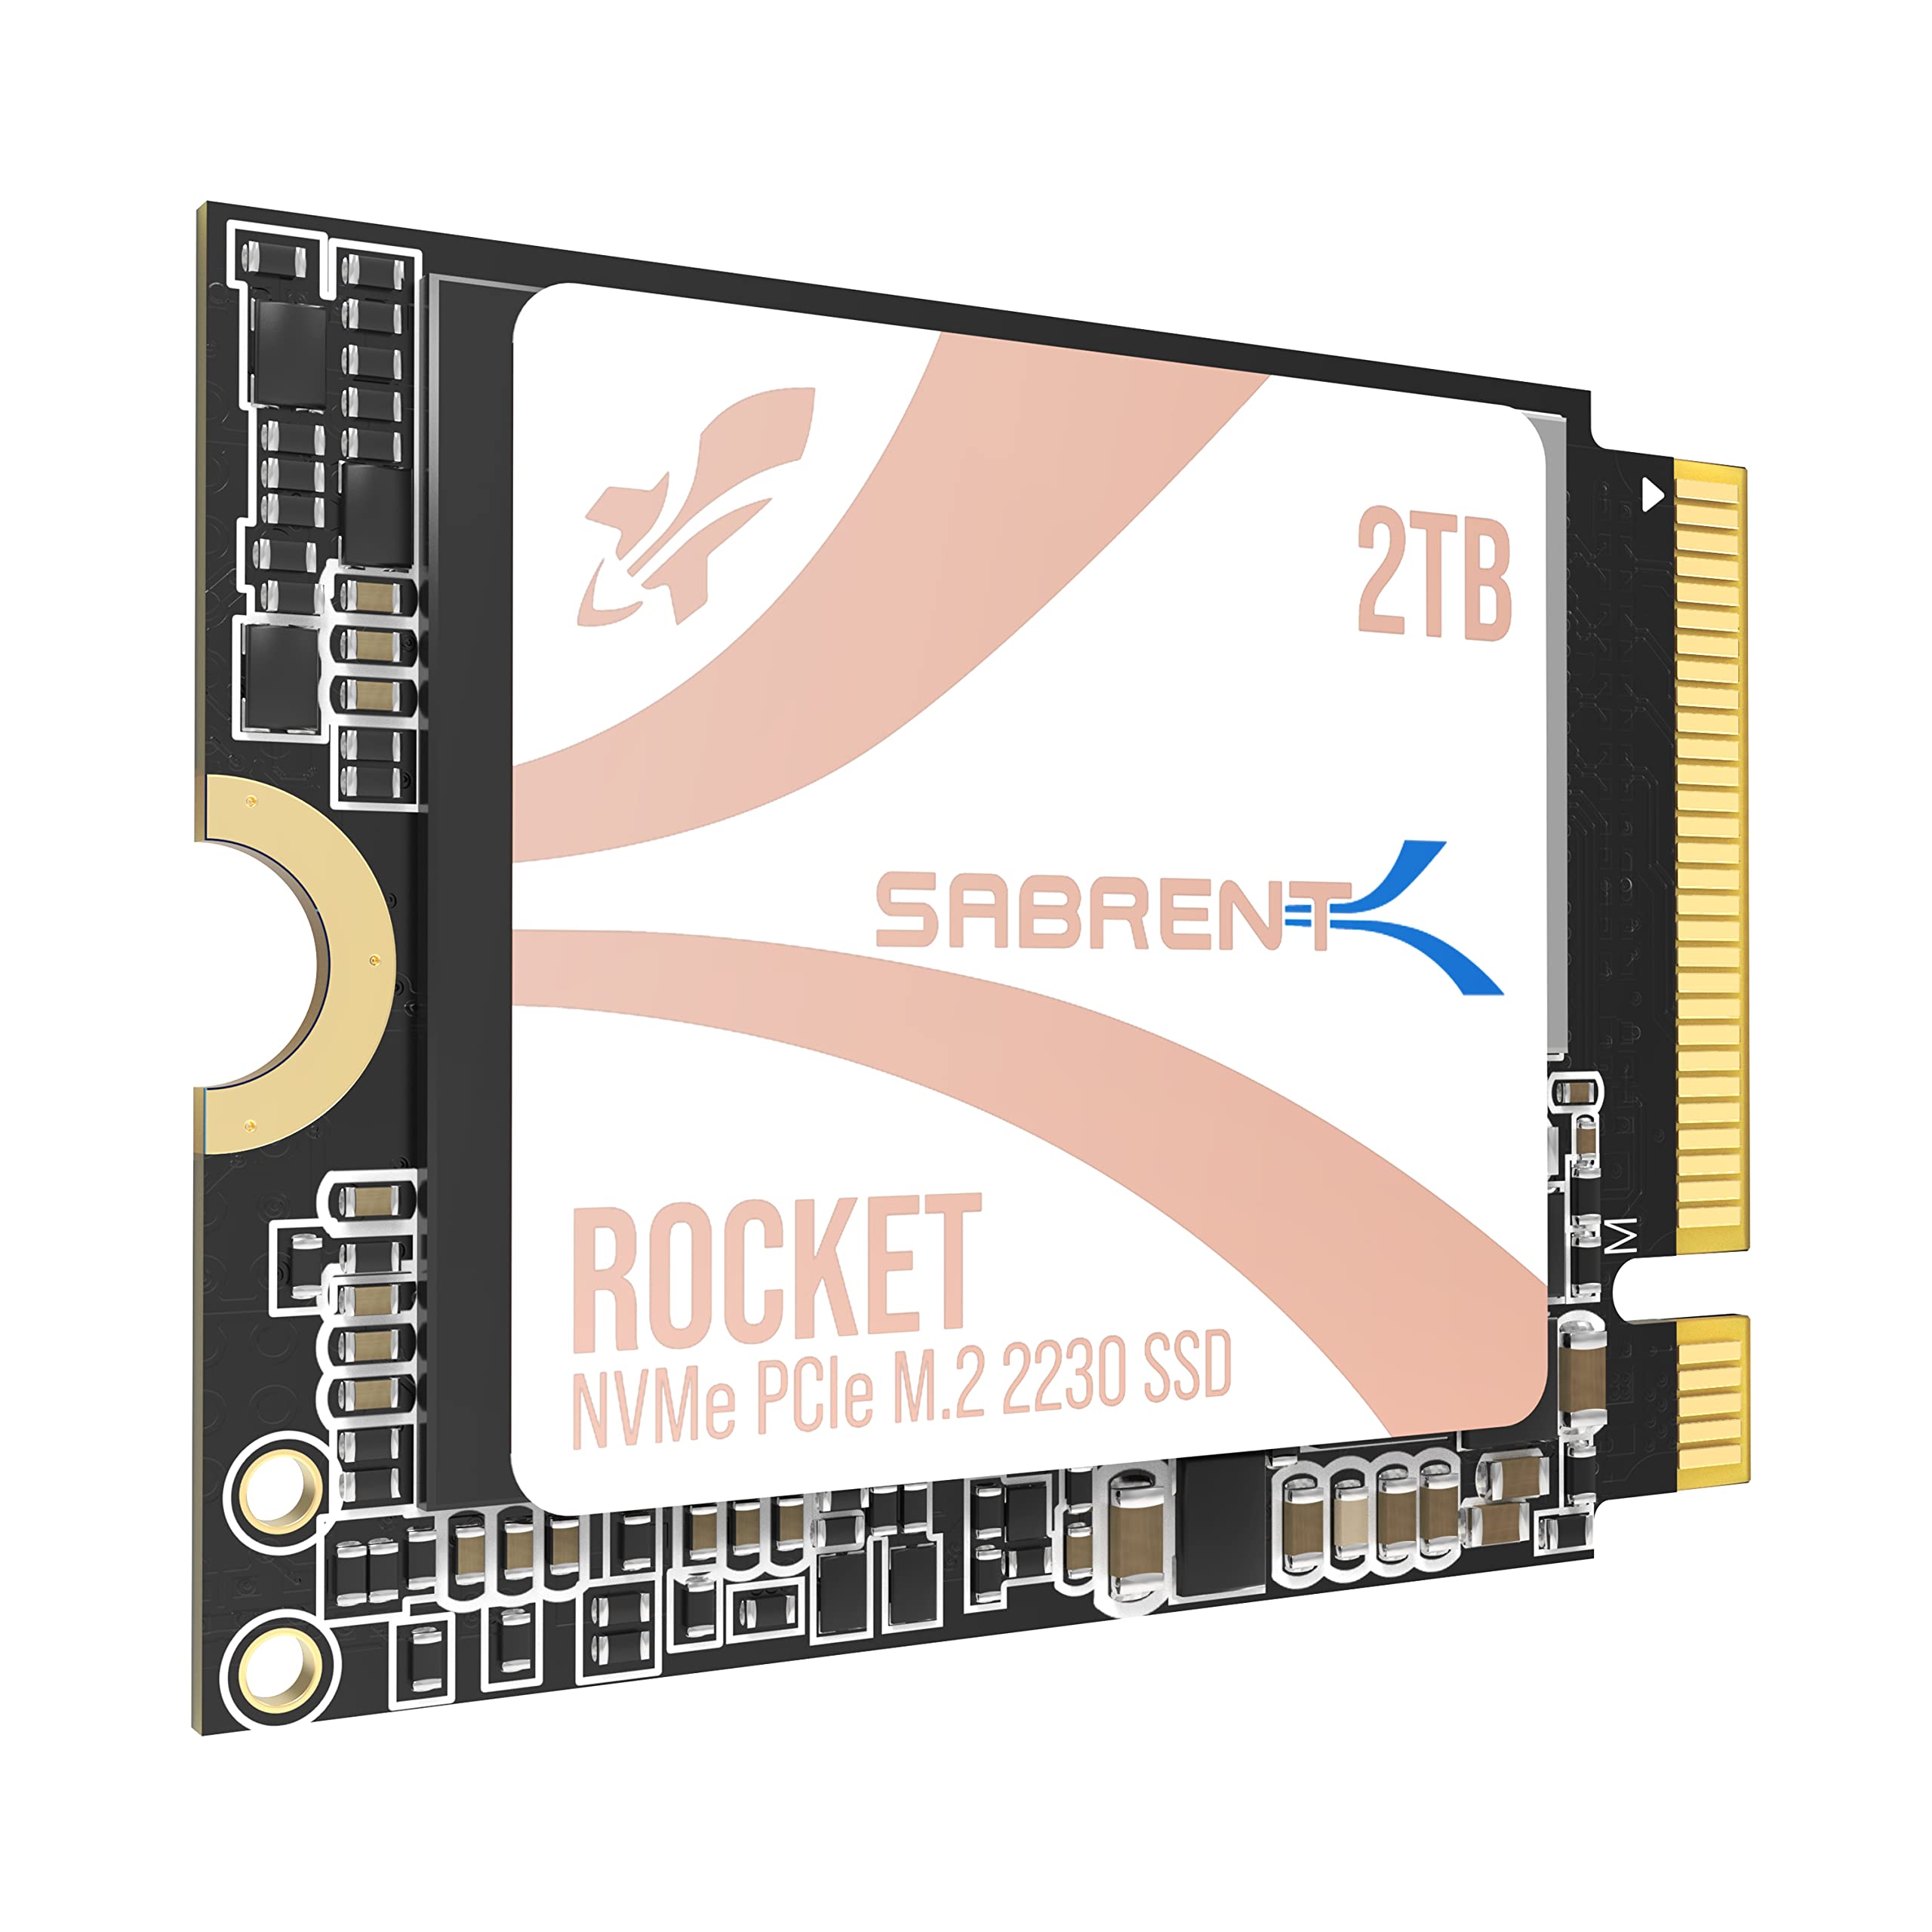 2TB Sabrent Rocket Q4 2230 NVMe PCIe 4.0 Solid State Drive SSD